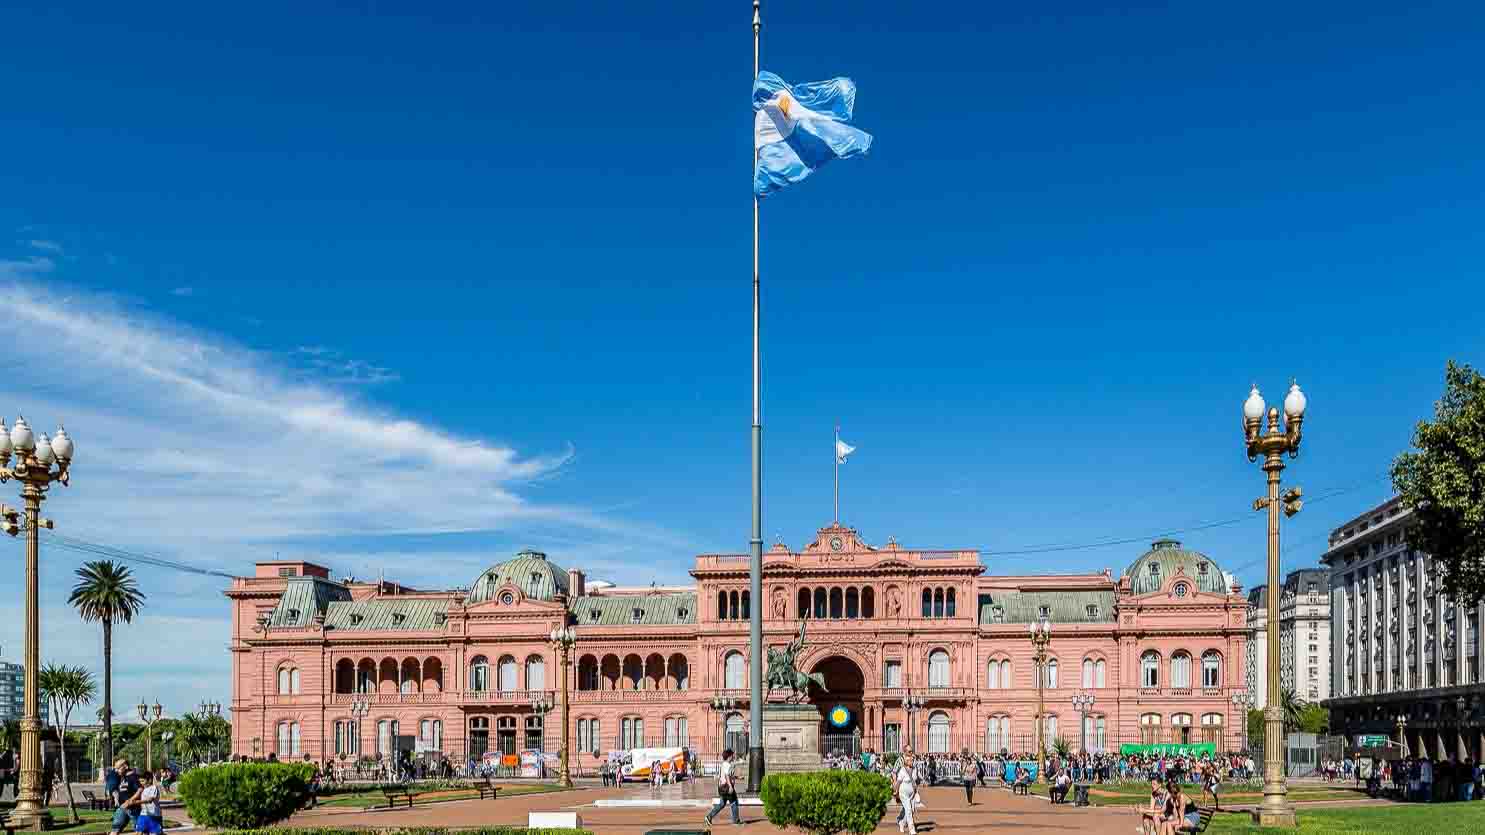 Spanning an area of 2,780,400 square km, Argentina is the 8th largest country in the world. It is the third richest country in South America in terms ...